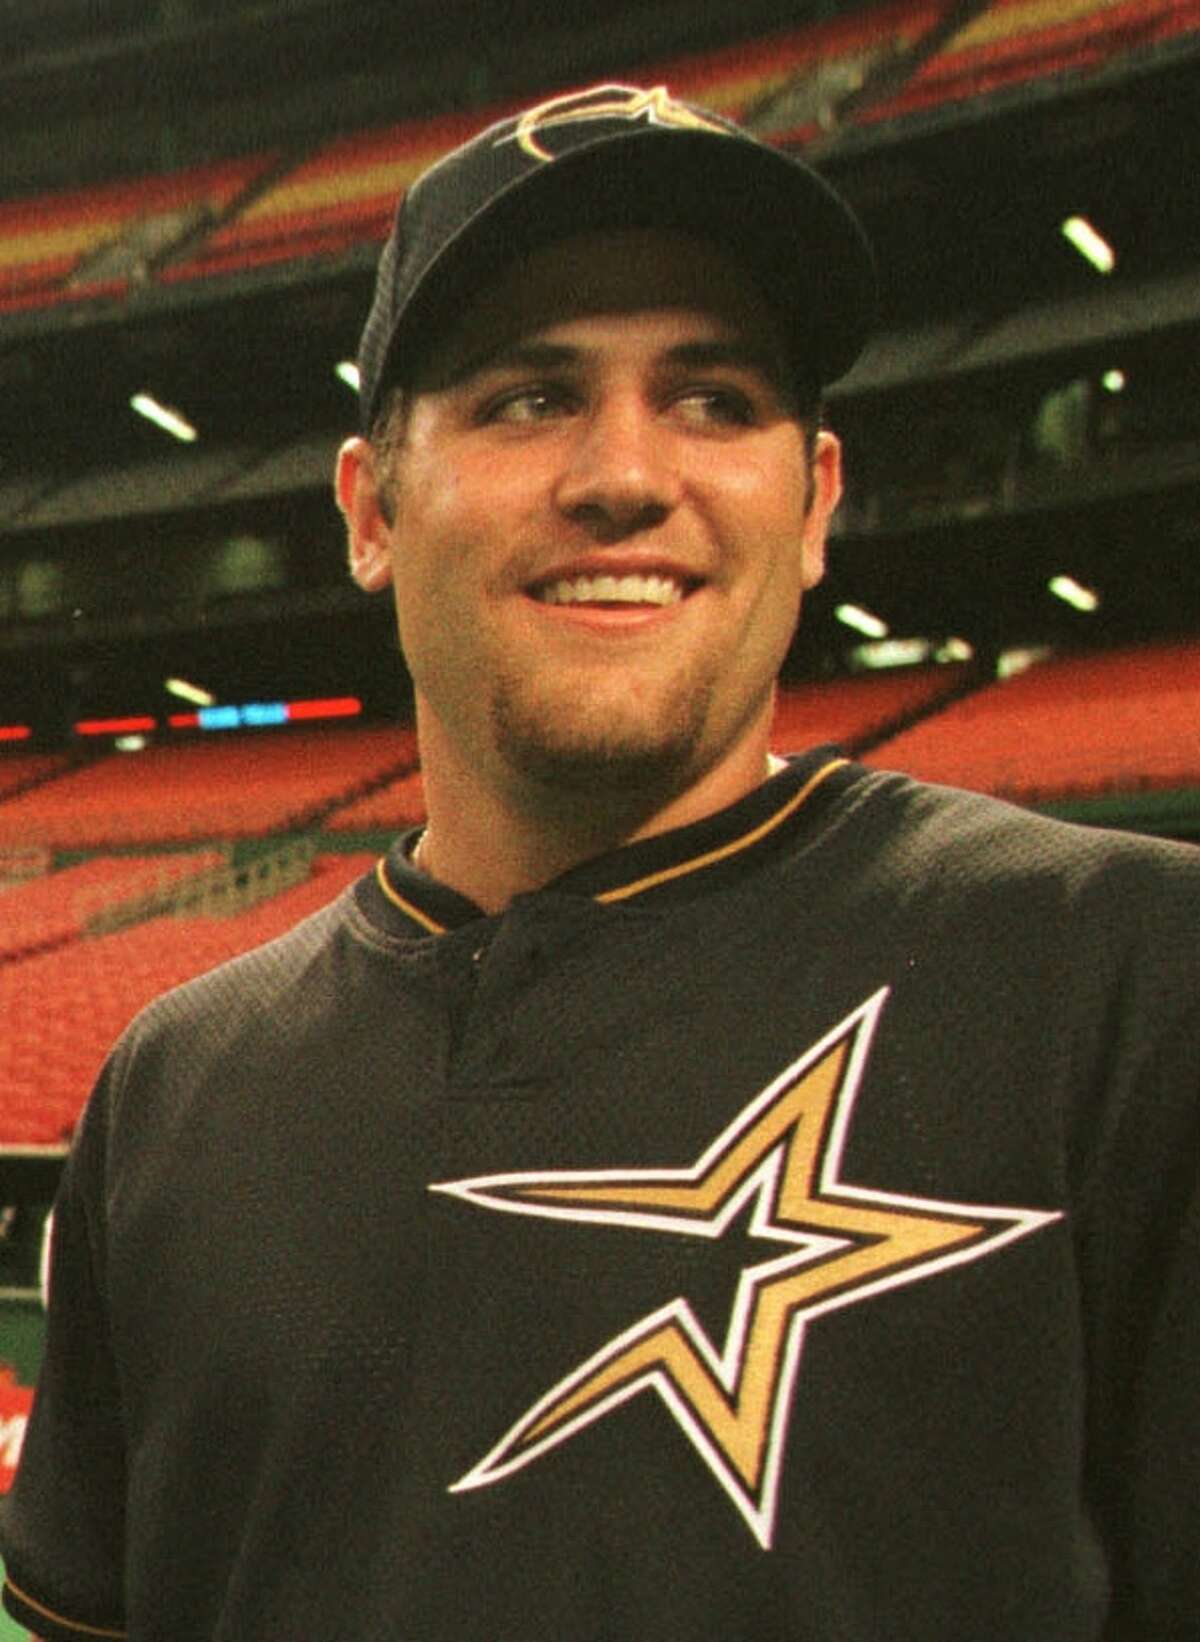 1999 season The Astros selected Berkman with 16th overall pick in the 1997 draft. He made his MLB debut for the team on June 16, 1999. In 34 games, he hit 237 with four homers and 15 RBI.